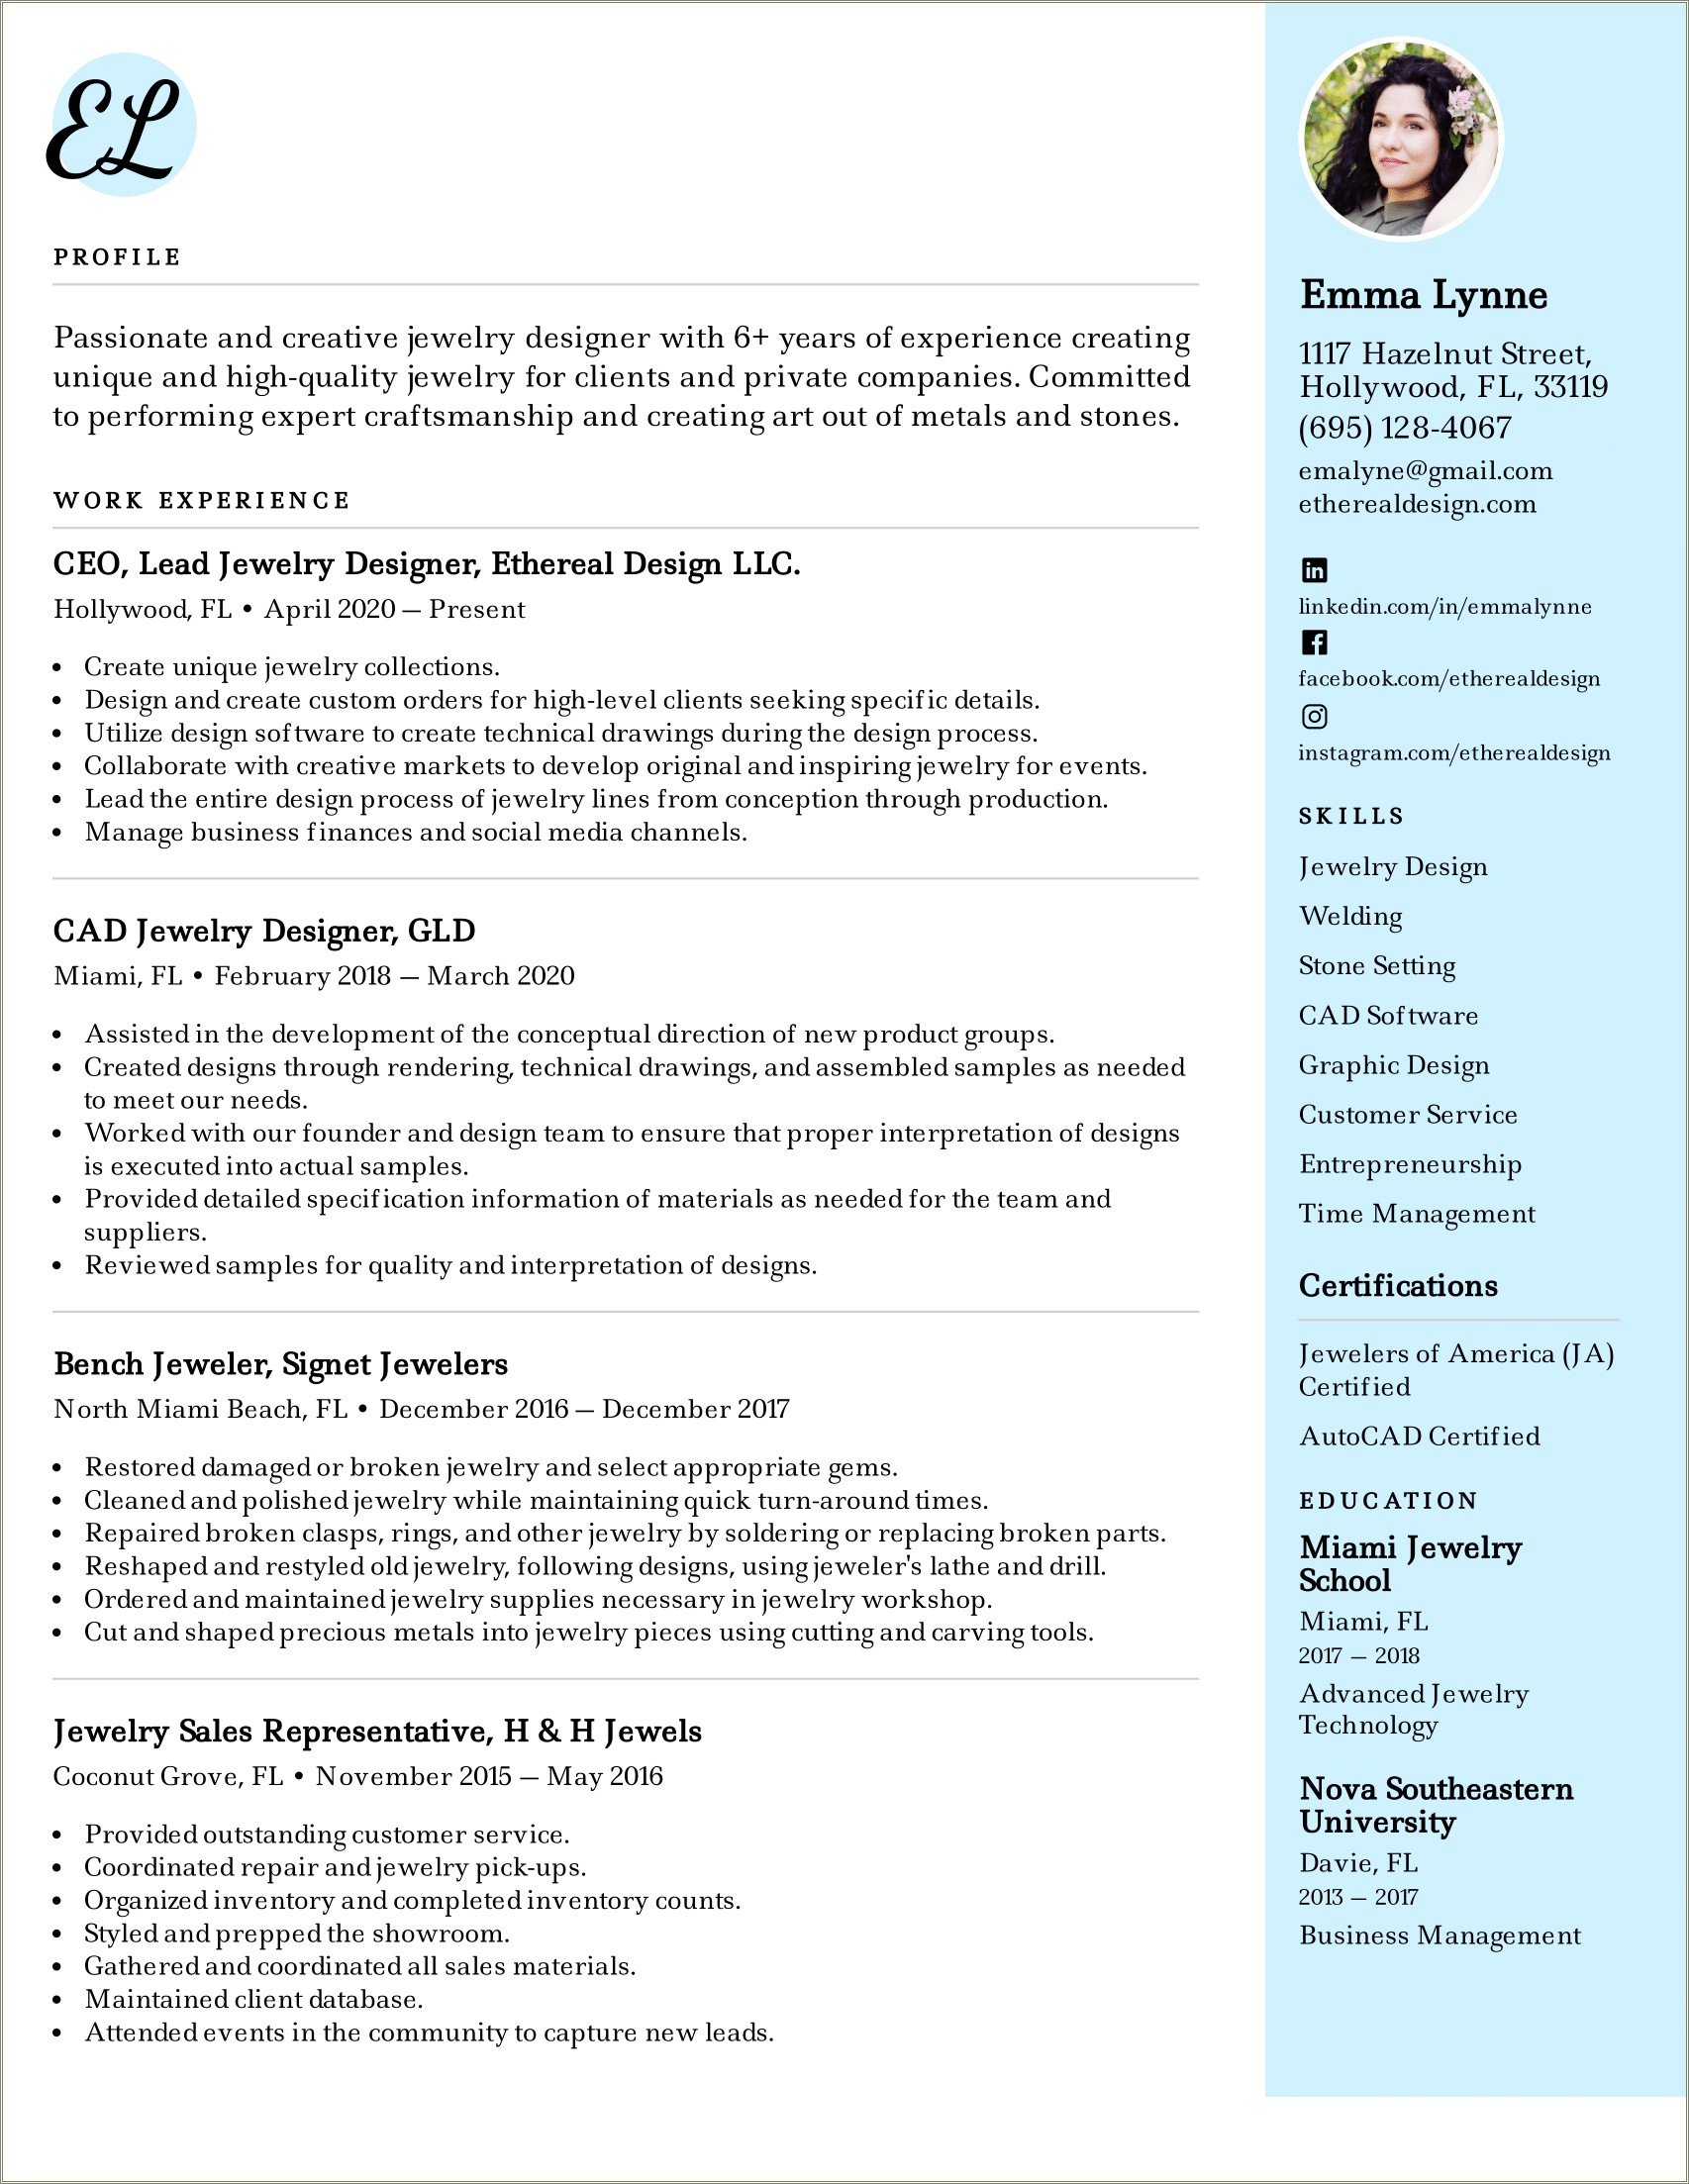 Examples Of Jewlery Assistant Manager Resumes